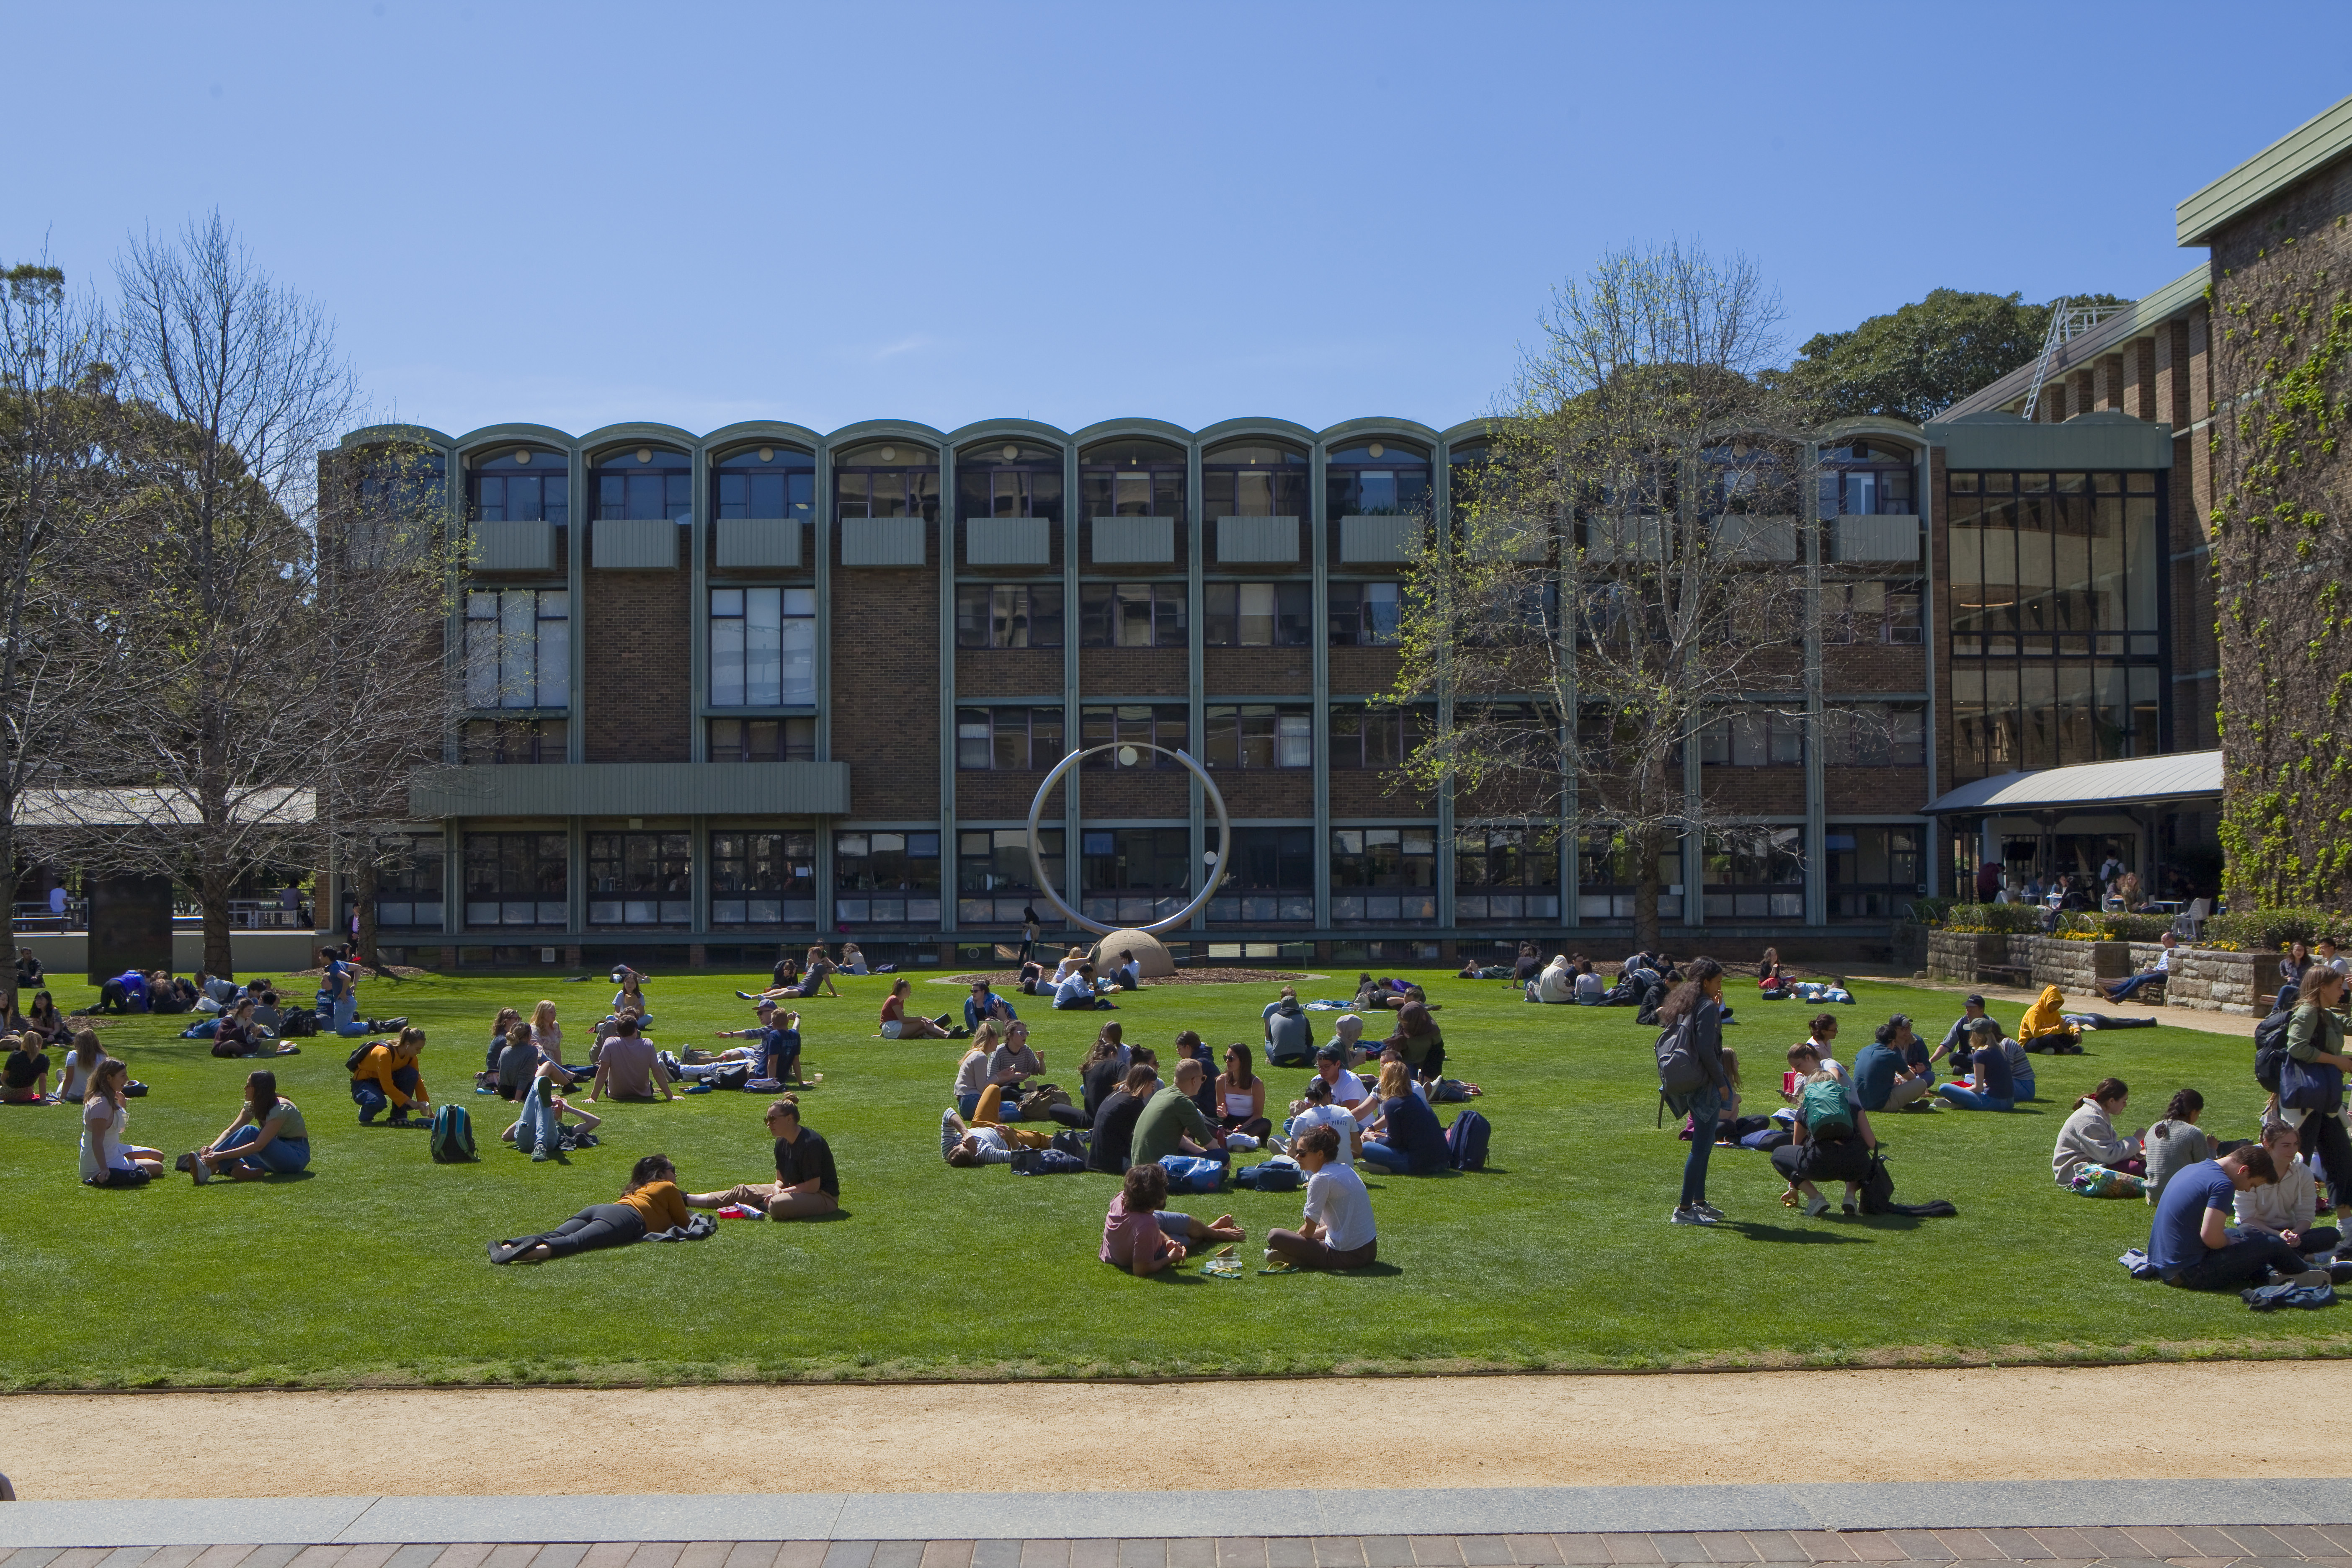 UNSW Campus with students on grass